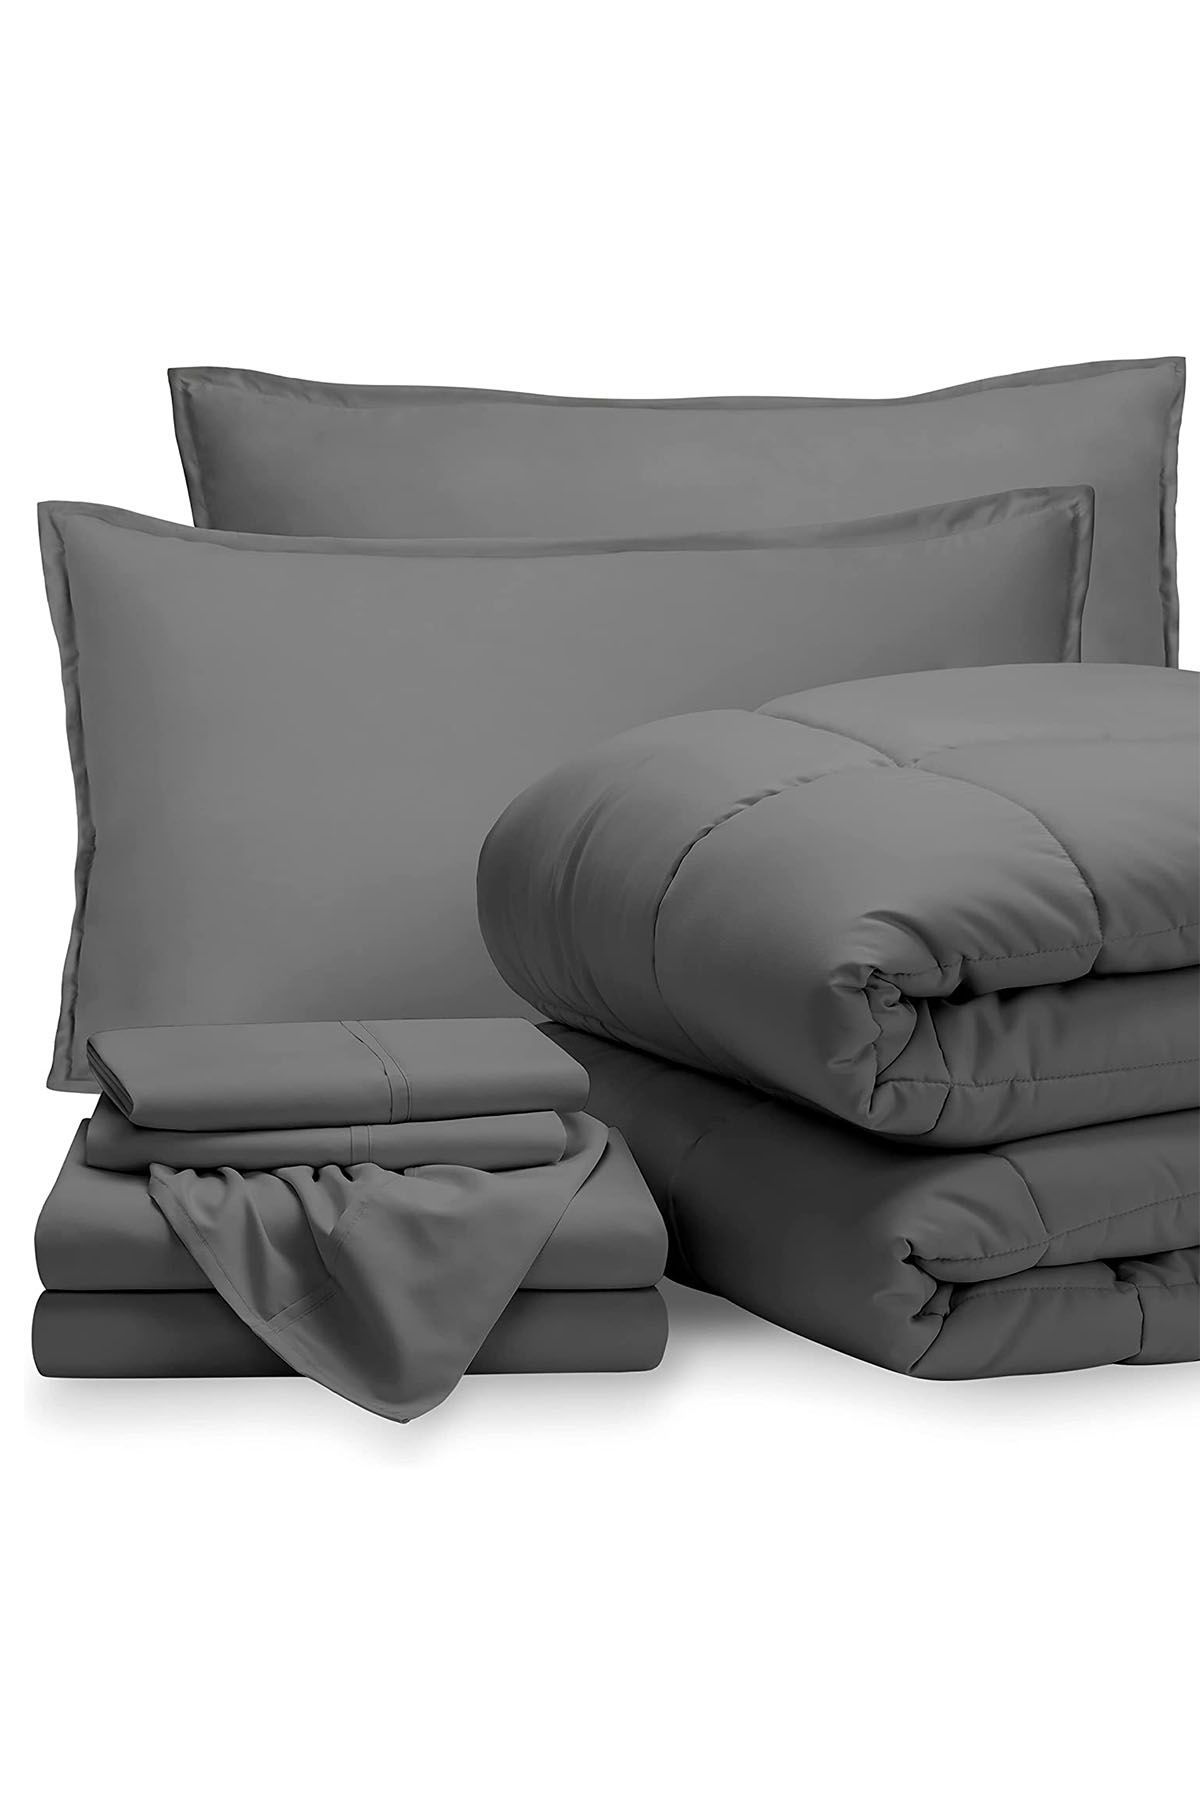 SHEETS 7 PIECE BED IN A BAG DOWN ALTERNATIVE COMFORTER PILLOWCASES AND SHAMS